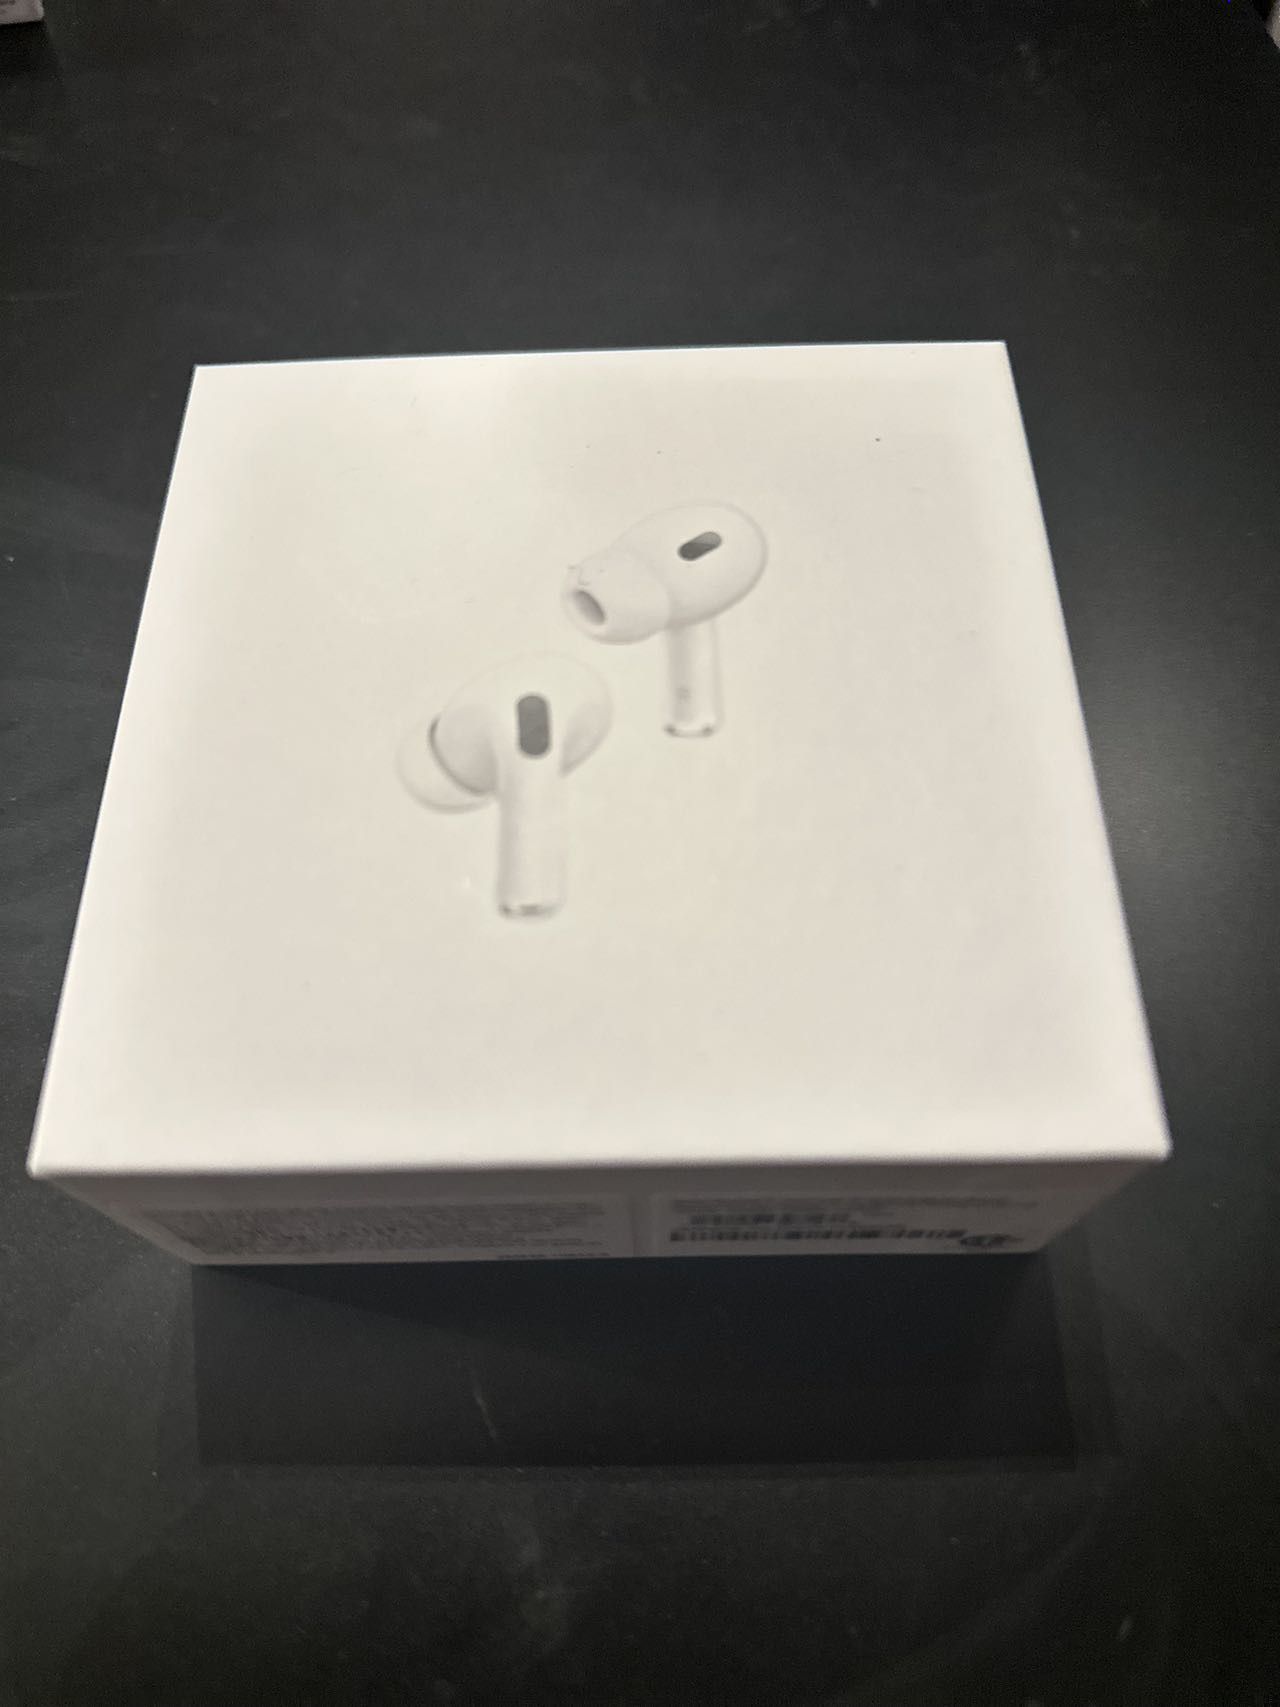 Apple AirPods Pro Wireless Earbuds, Up to 2X More Active Noise Cancelling, Adaptive Transparency, Personalized Spatial Audio, MagSafe Charging Case, B